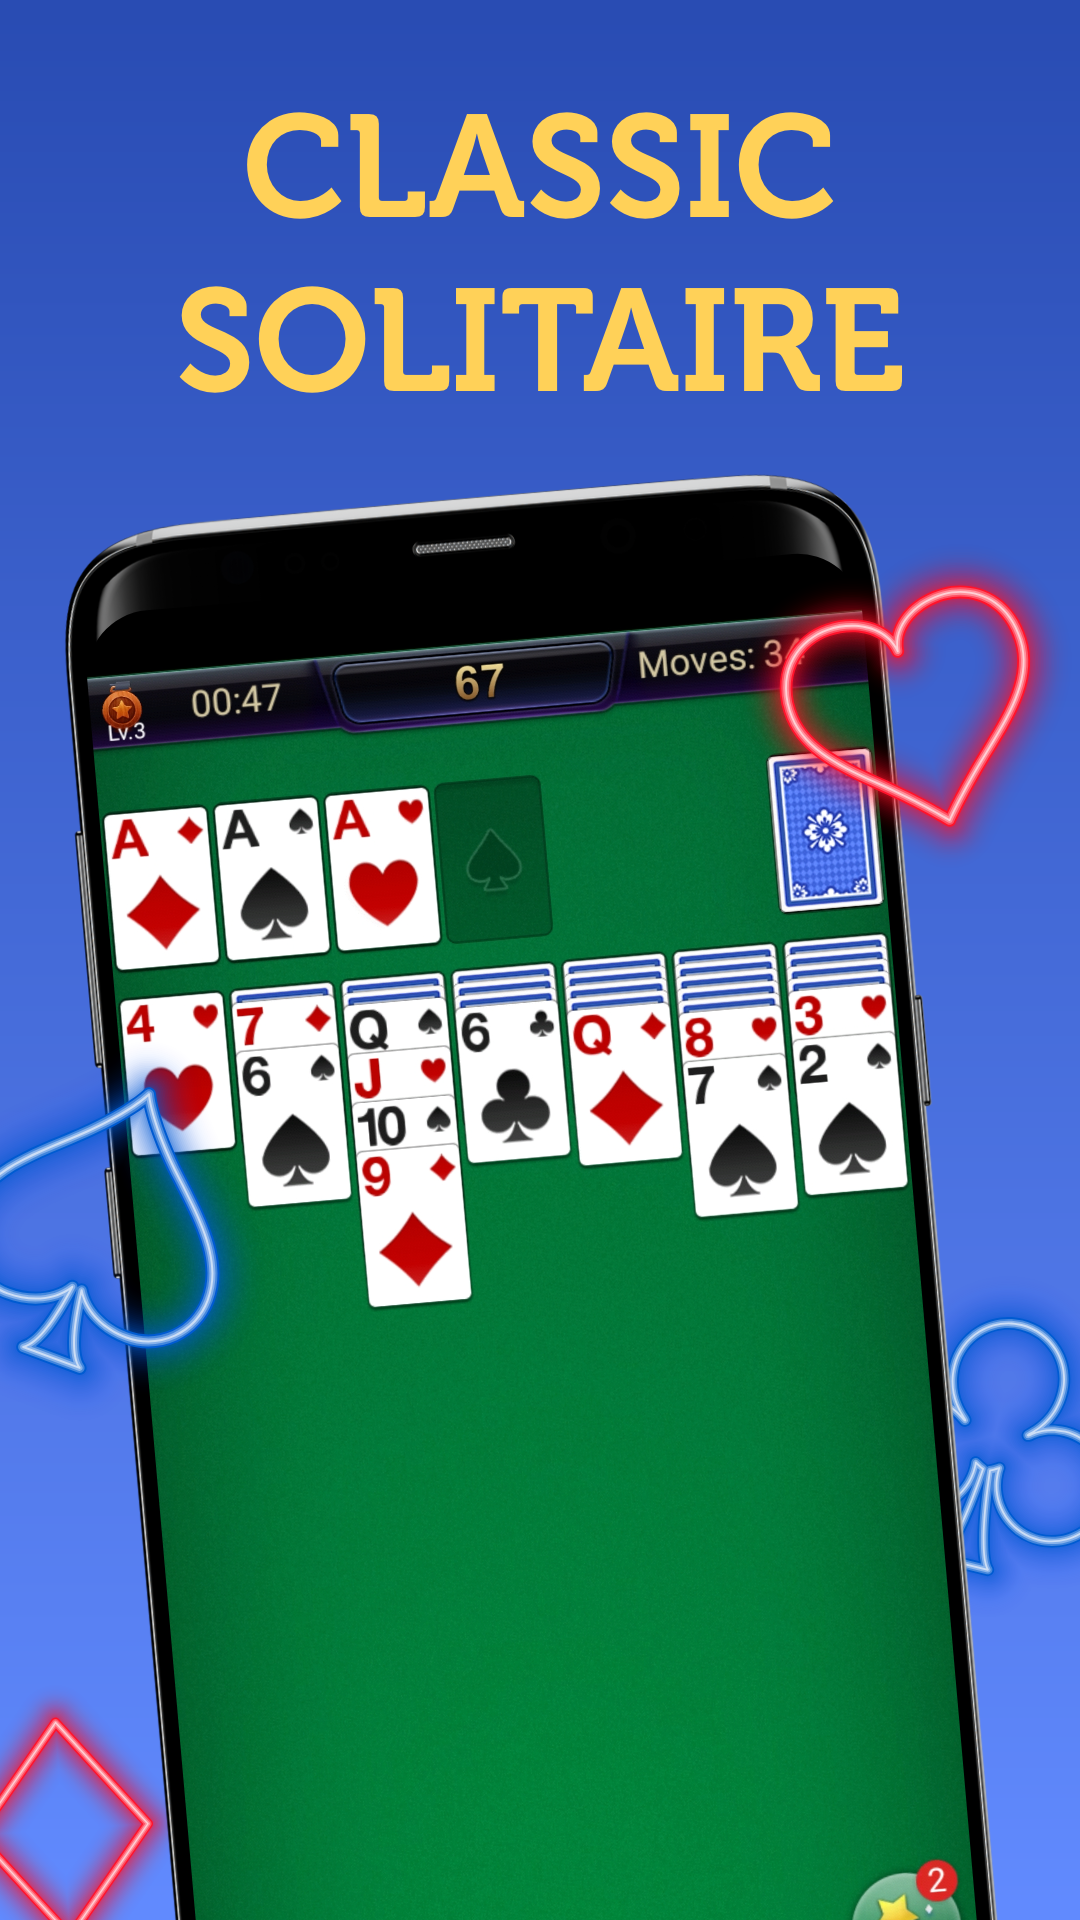 Screenshot 1 of Solitaire - Card Games 2.178.0